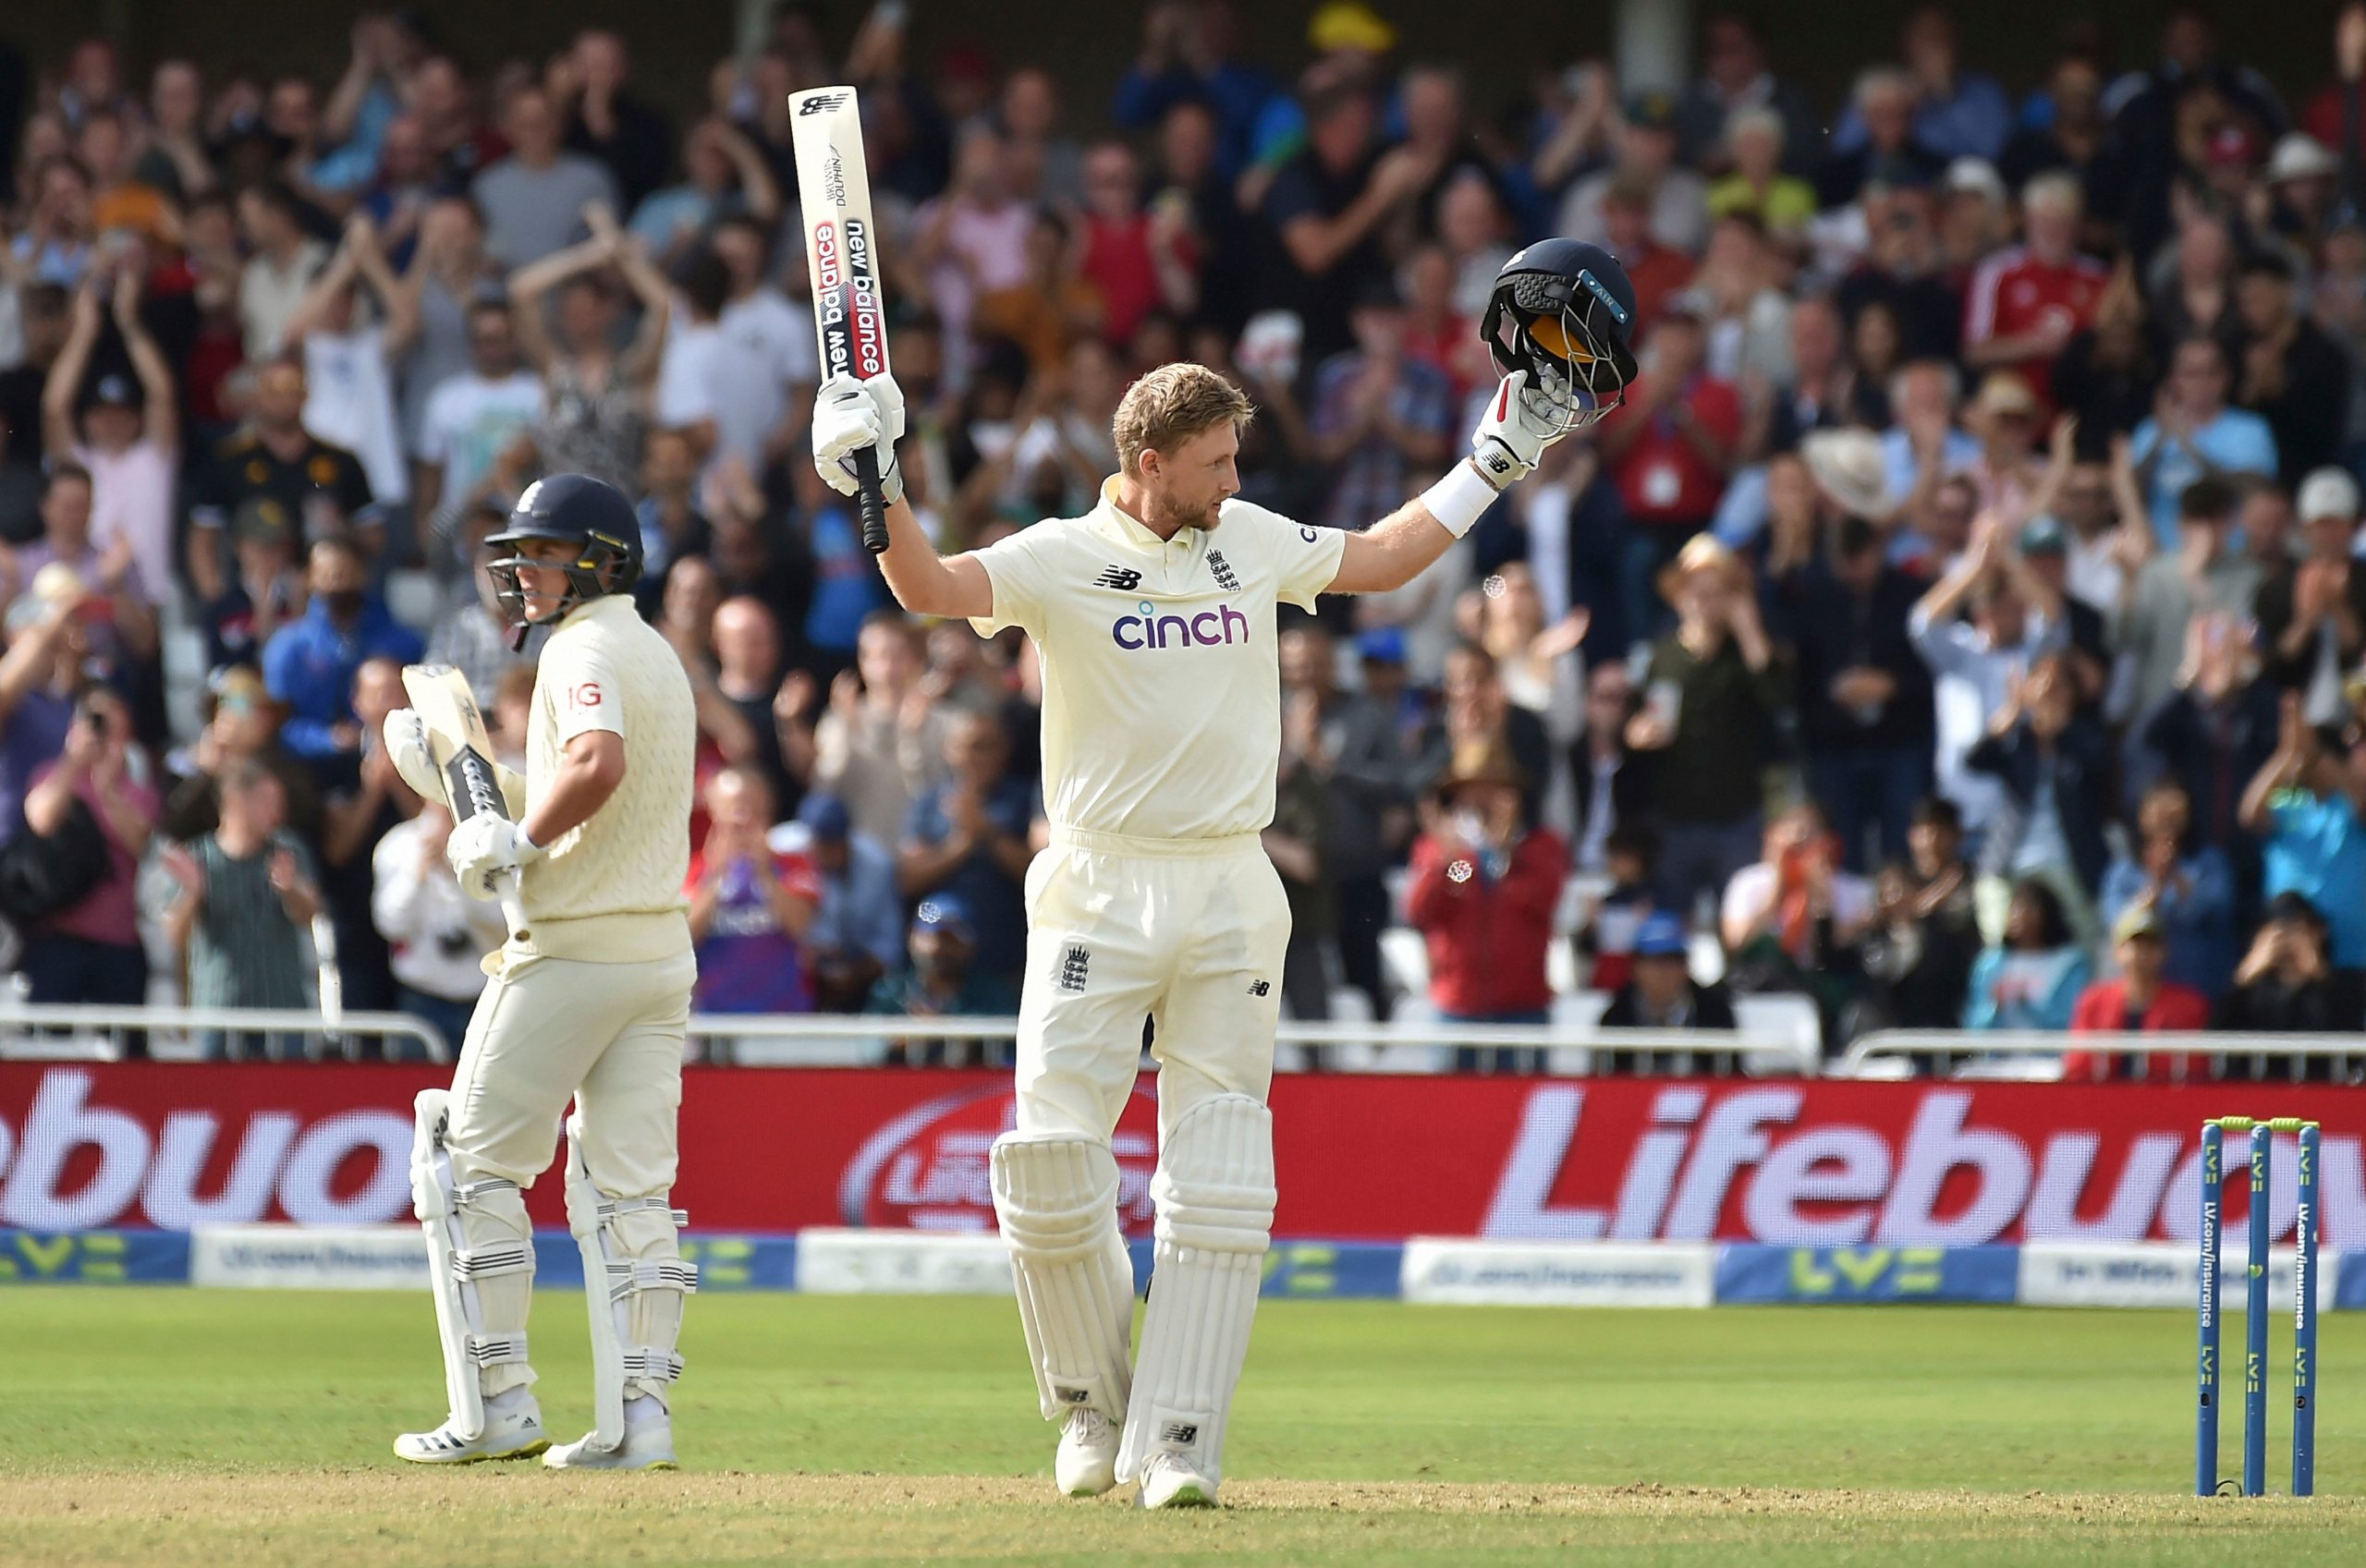 Joe Root closing in on 91-year-old Don Bradman record. Read here